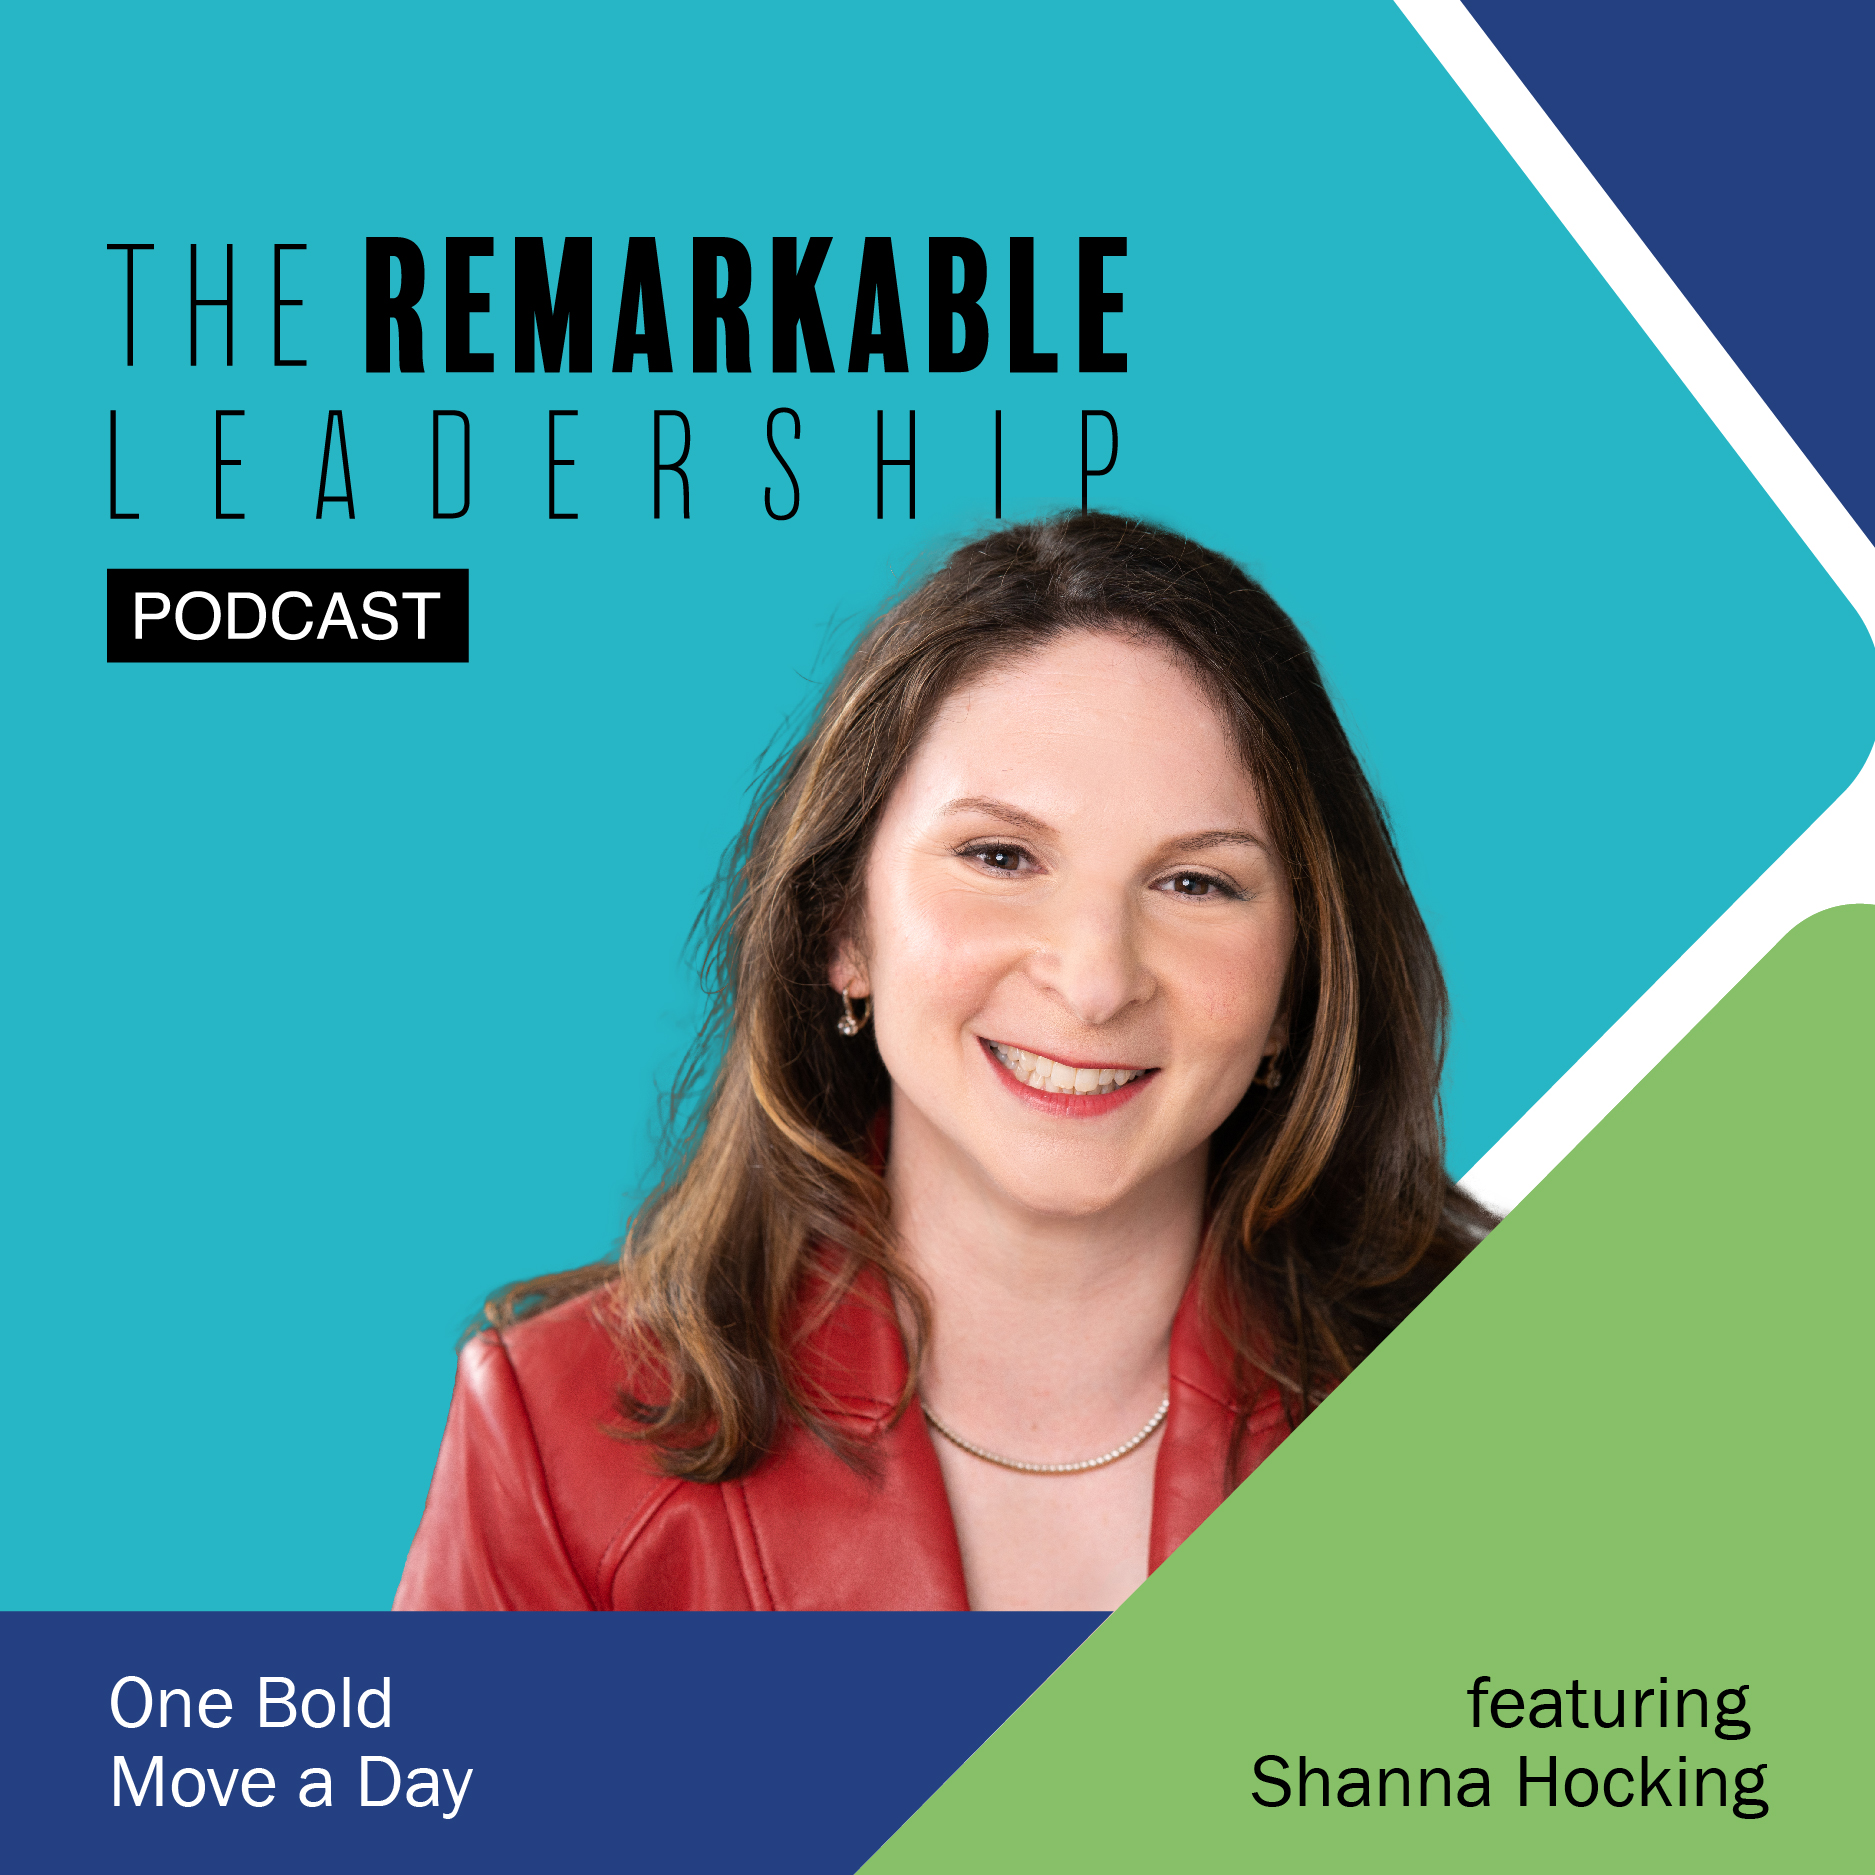 One Bold Move a Day with Shanna Hocking on The Remarkable Leadership Podcast with Kevin Eikenberry